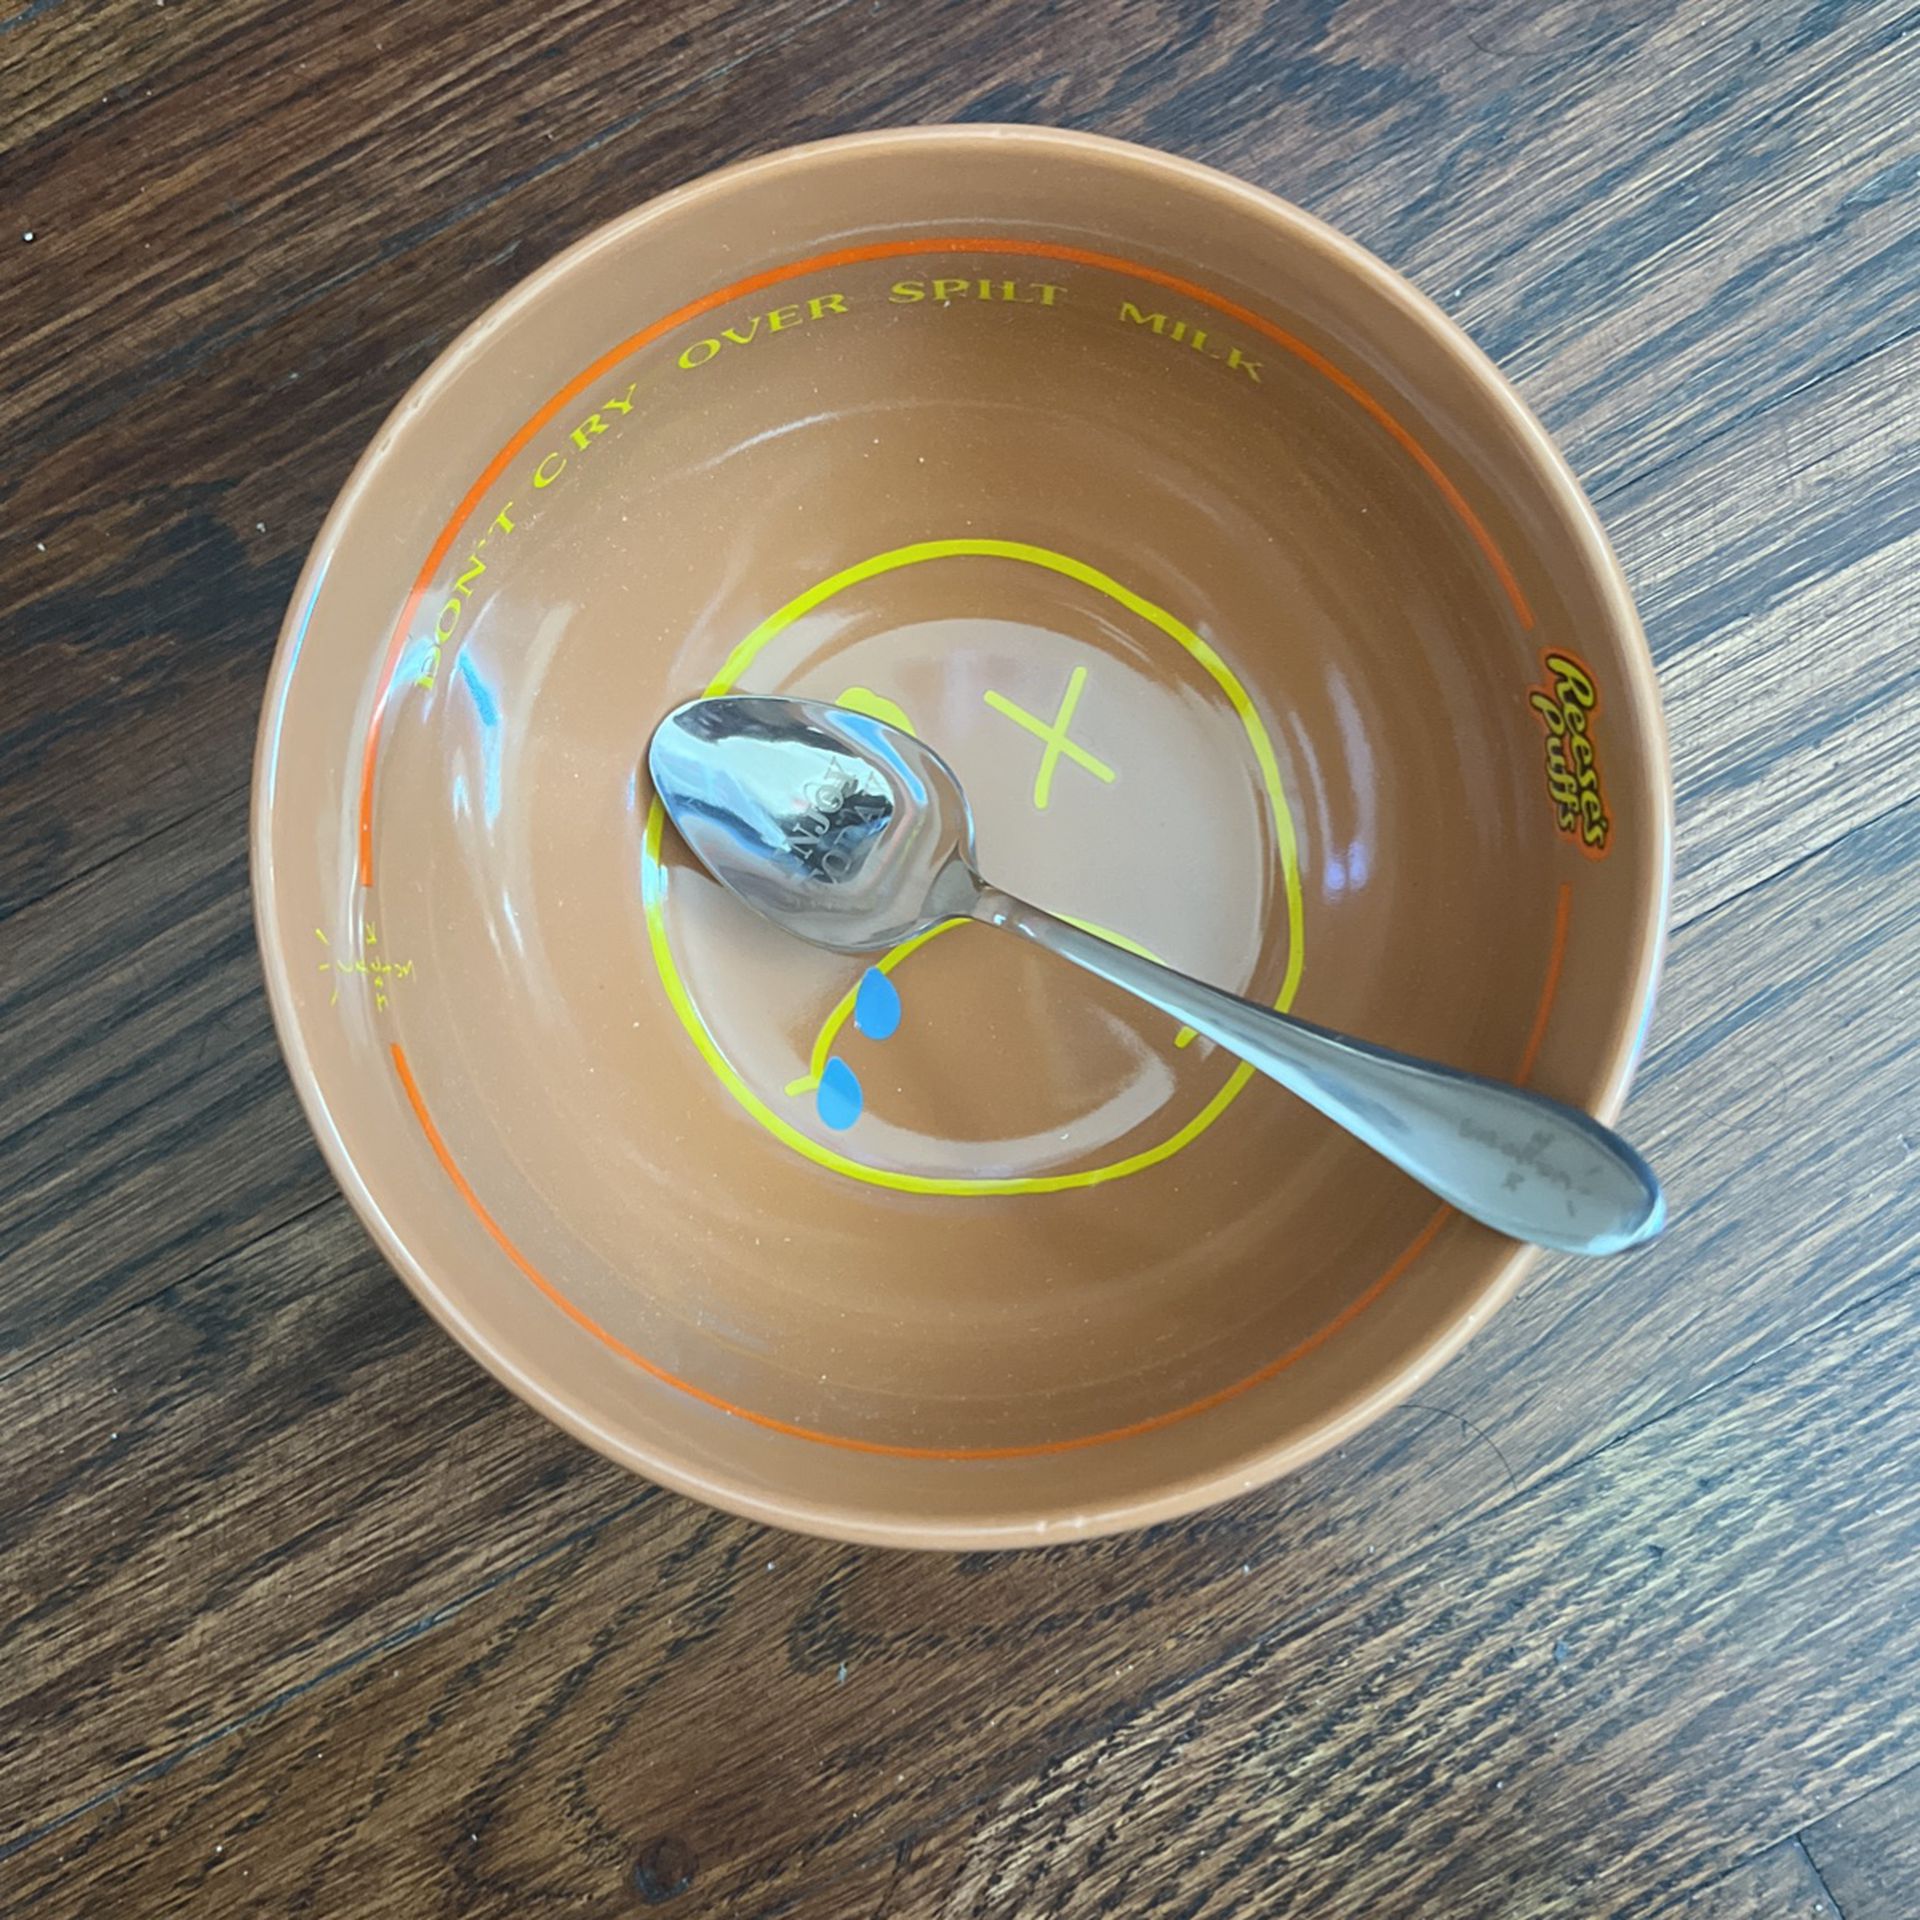 Travis Scott Reese's Puffs Spoon Silver and bowl